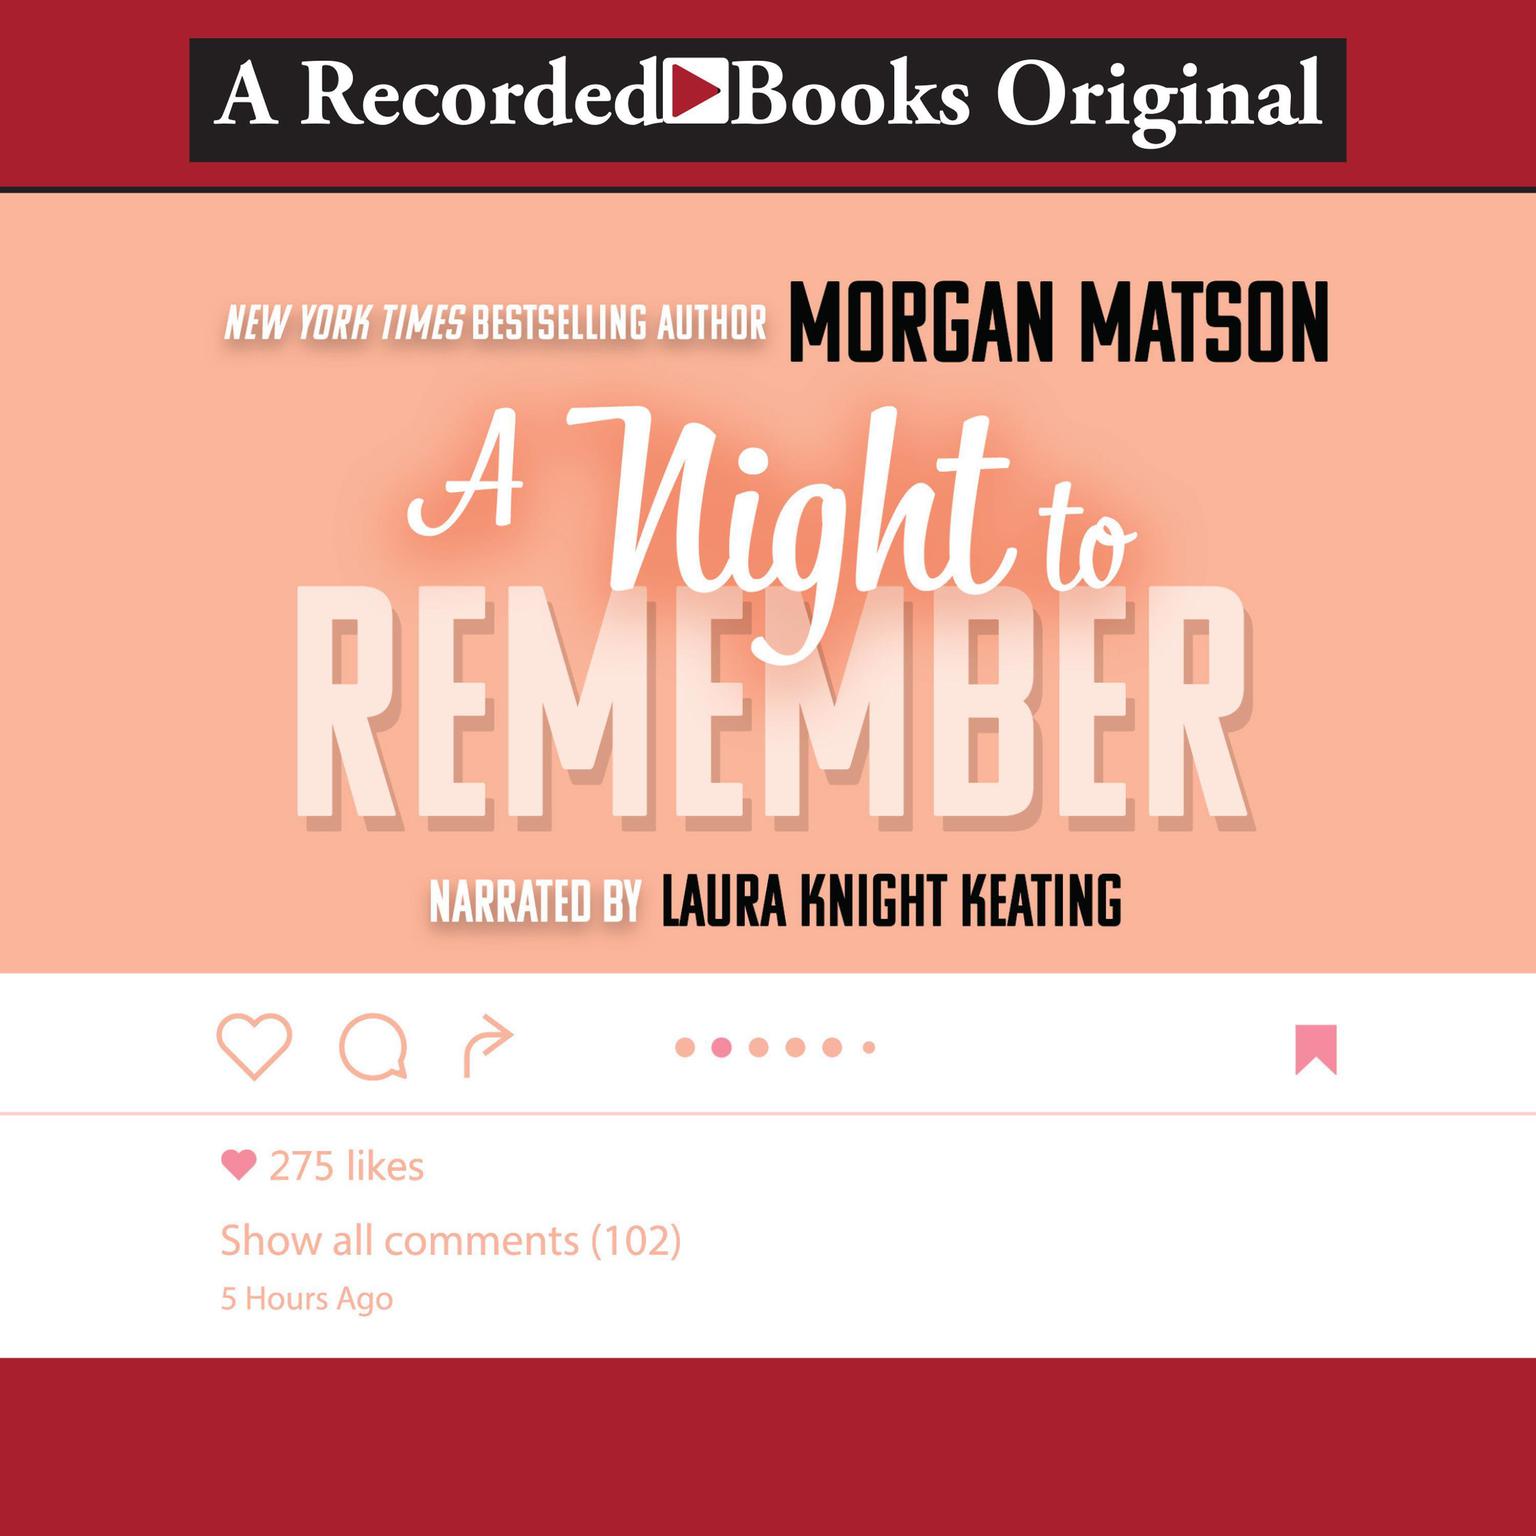 A Night to Remember Audiobook, by Morgan Matson